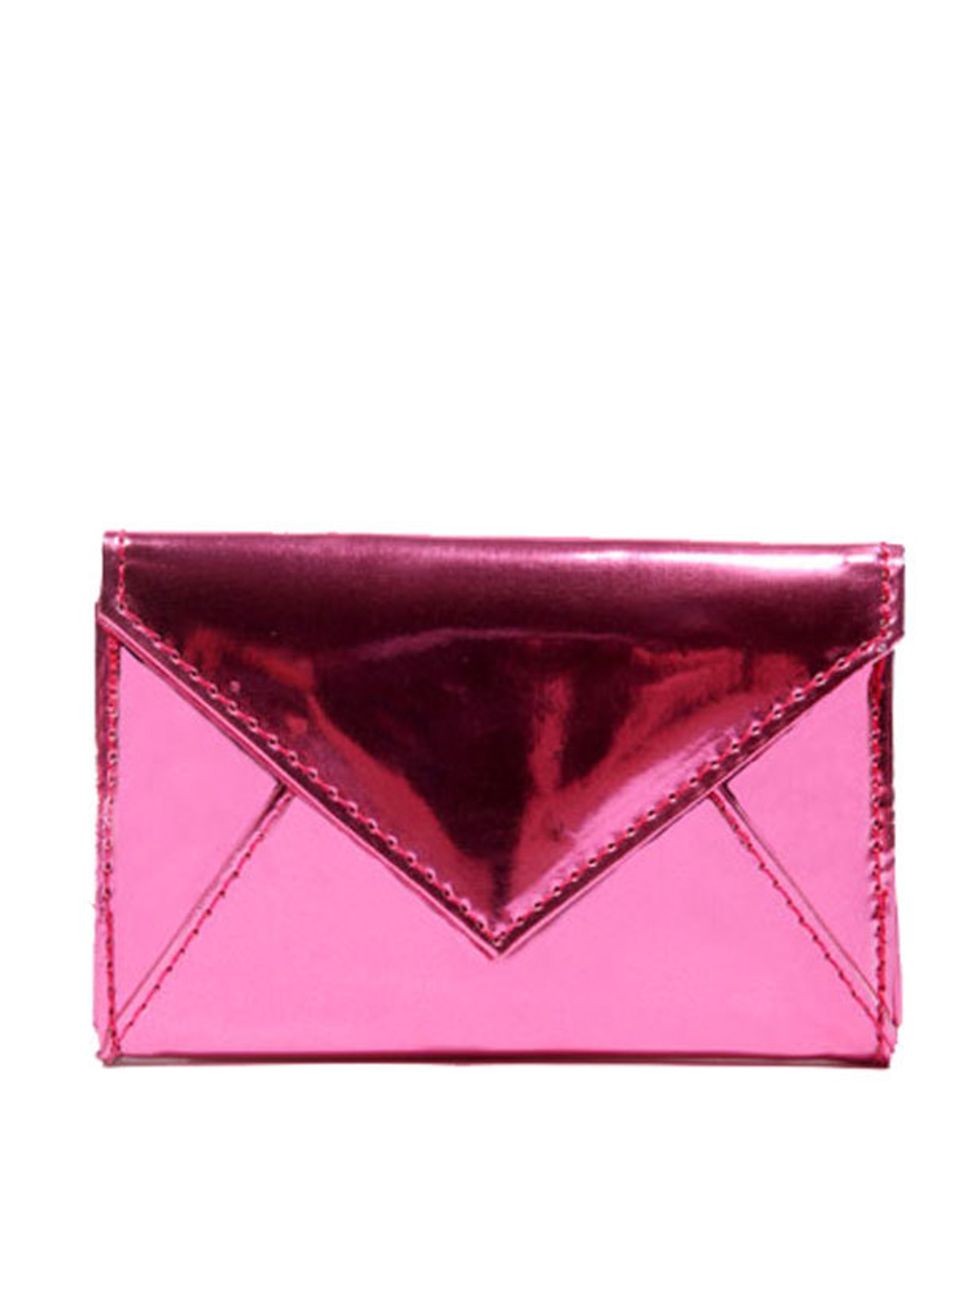 <p>Pink and metallic? This is the perfect party purse <a href="http://www.urbanoutfitters.co.uk/foil-mini-envelope-purse/invt/5770463413504/&amp;bklis">Urban Outfitters</a> pink foil purse, £12</p>